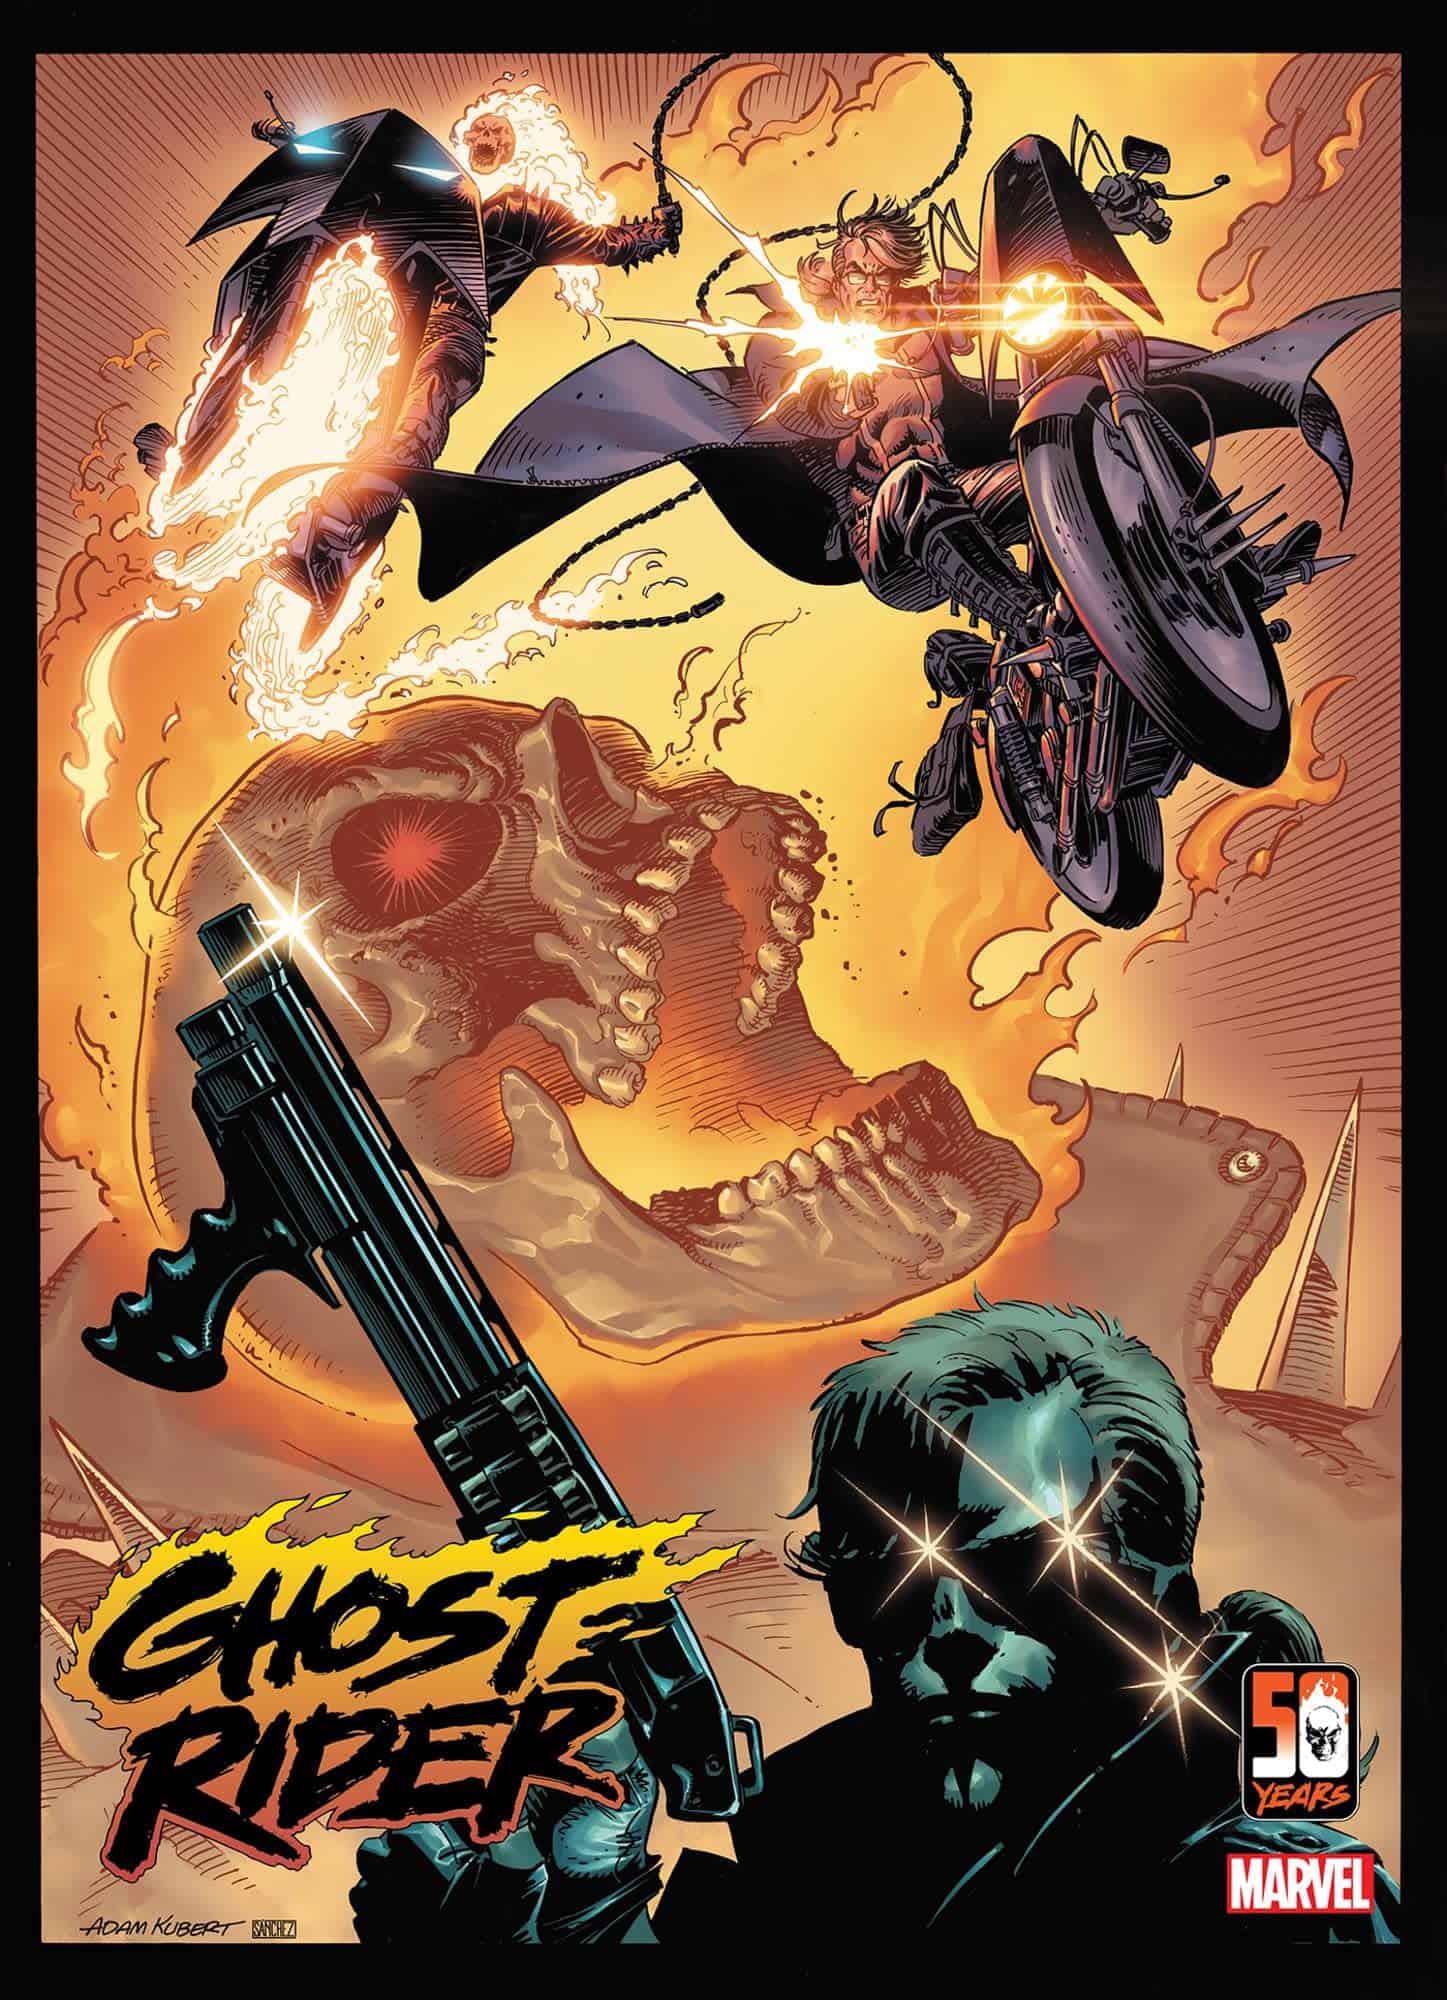 Marvel A Main Cover Kael Ngu Release 02/23/2022 2022 Ghost Rider #1